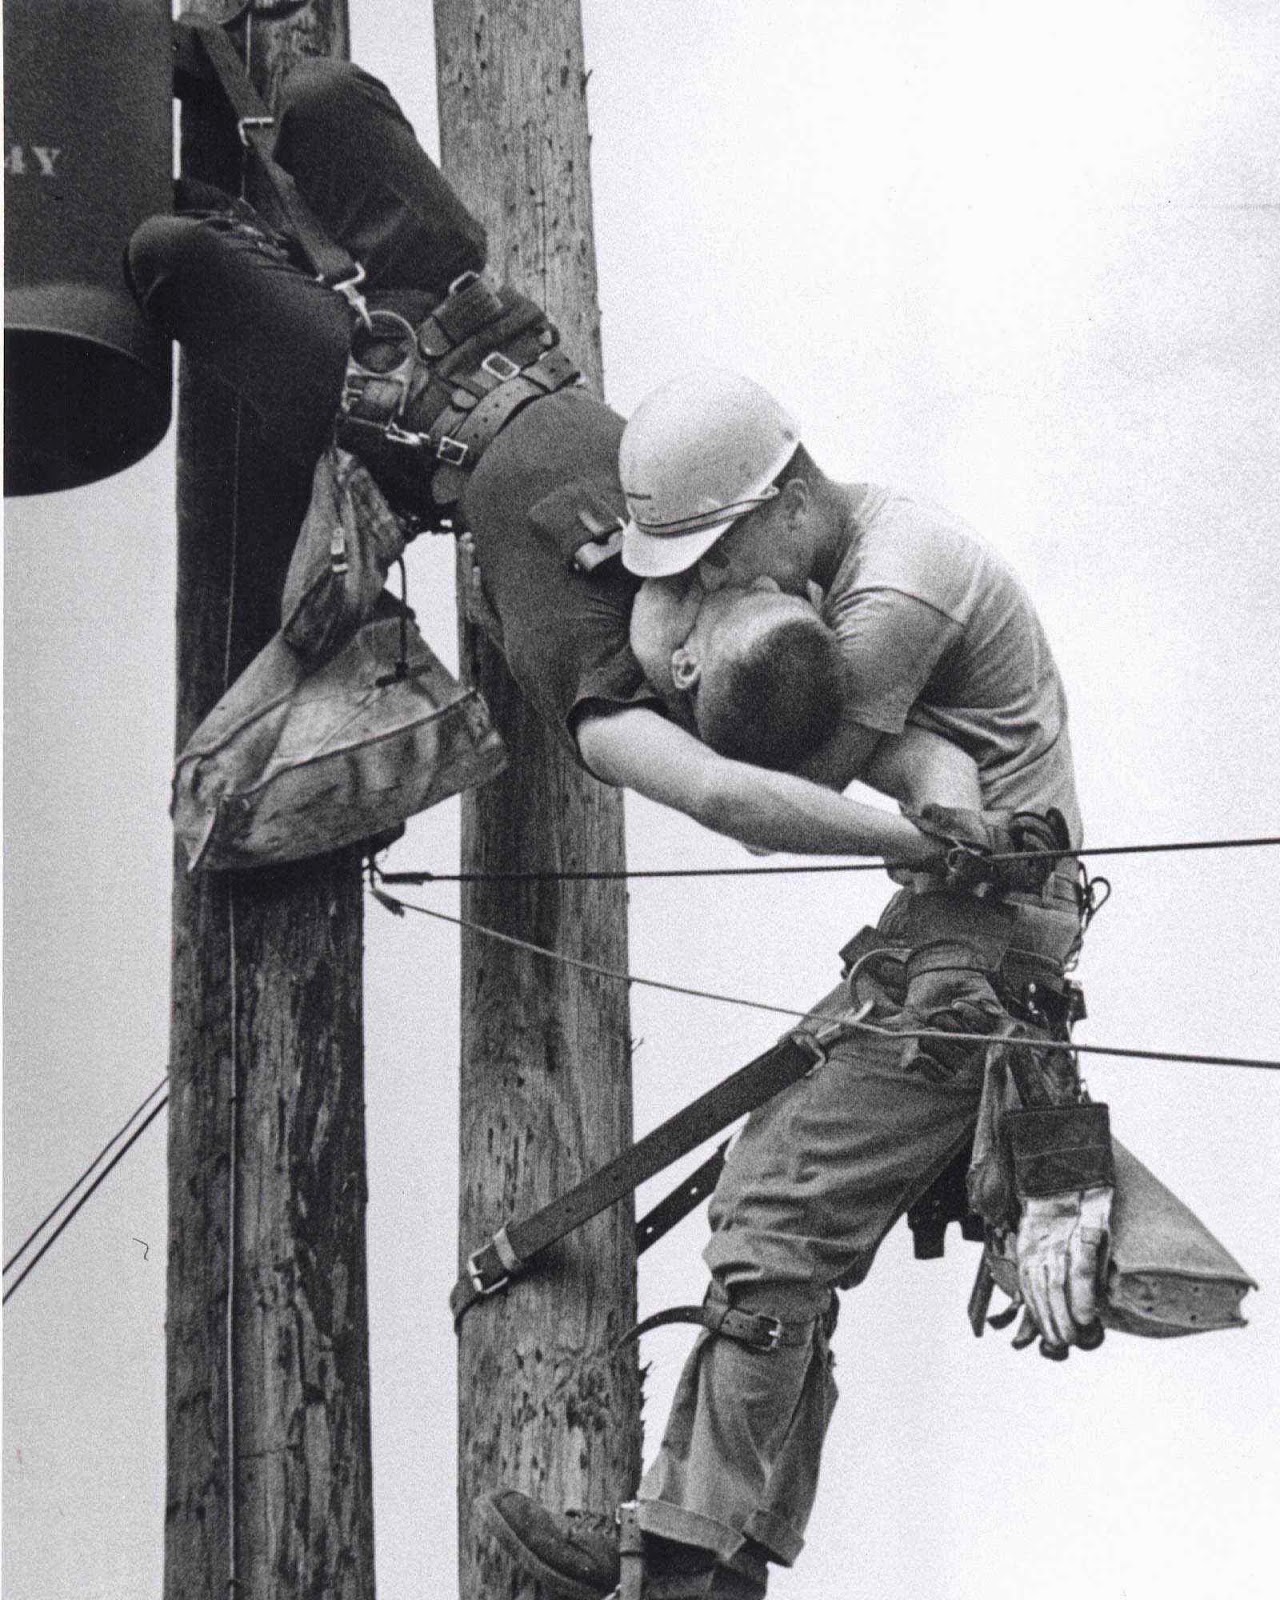 The+Kiss+of+Life+-+A+utility+worker+giving+mouth-to-mouth+to+co-worker+after+he+contacted+a+high+voltage+wire,+1967.jpg